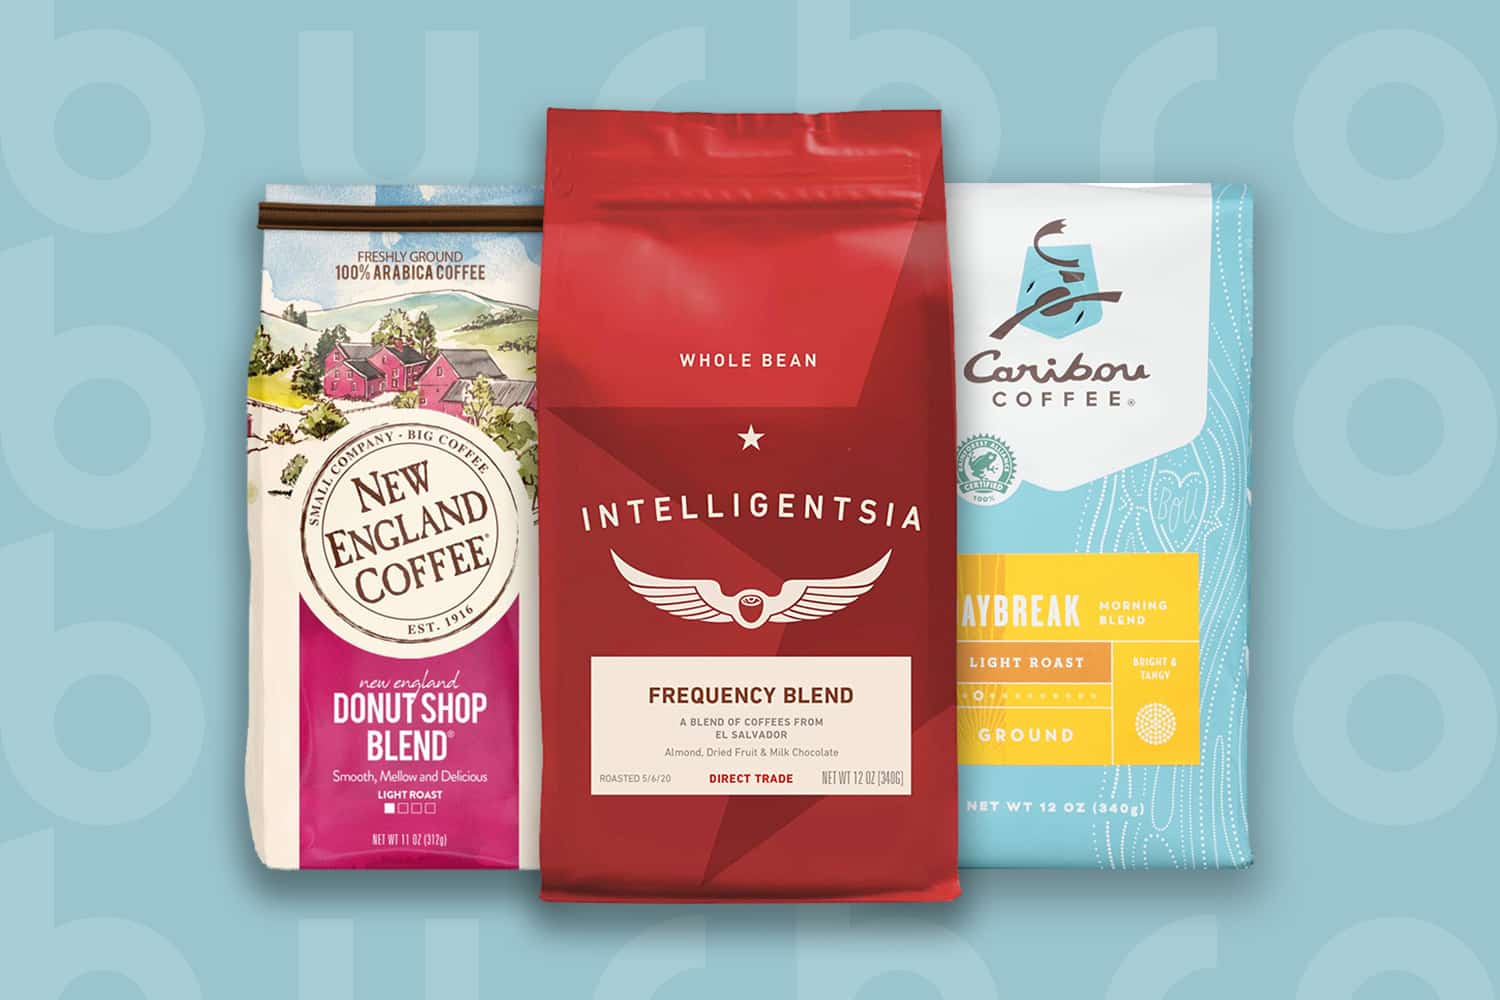 This is the cover photo for our Best Coffee Brands article. It features a bag of New England Coffee, a bag of Intelligentsia Coffee, and a bag of Caribou Coffee, all overlaid on a blue background with an embossed Burbro logo.